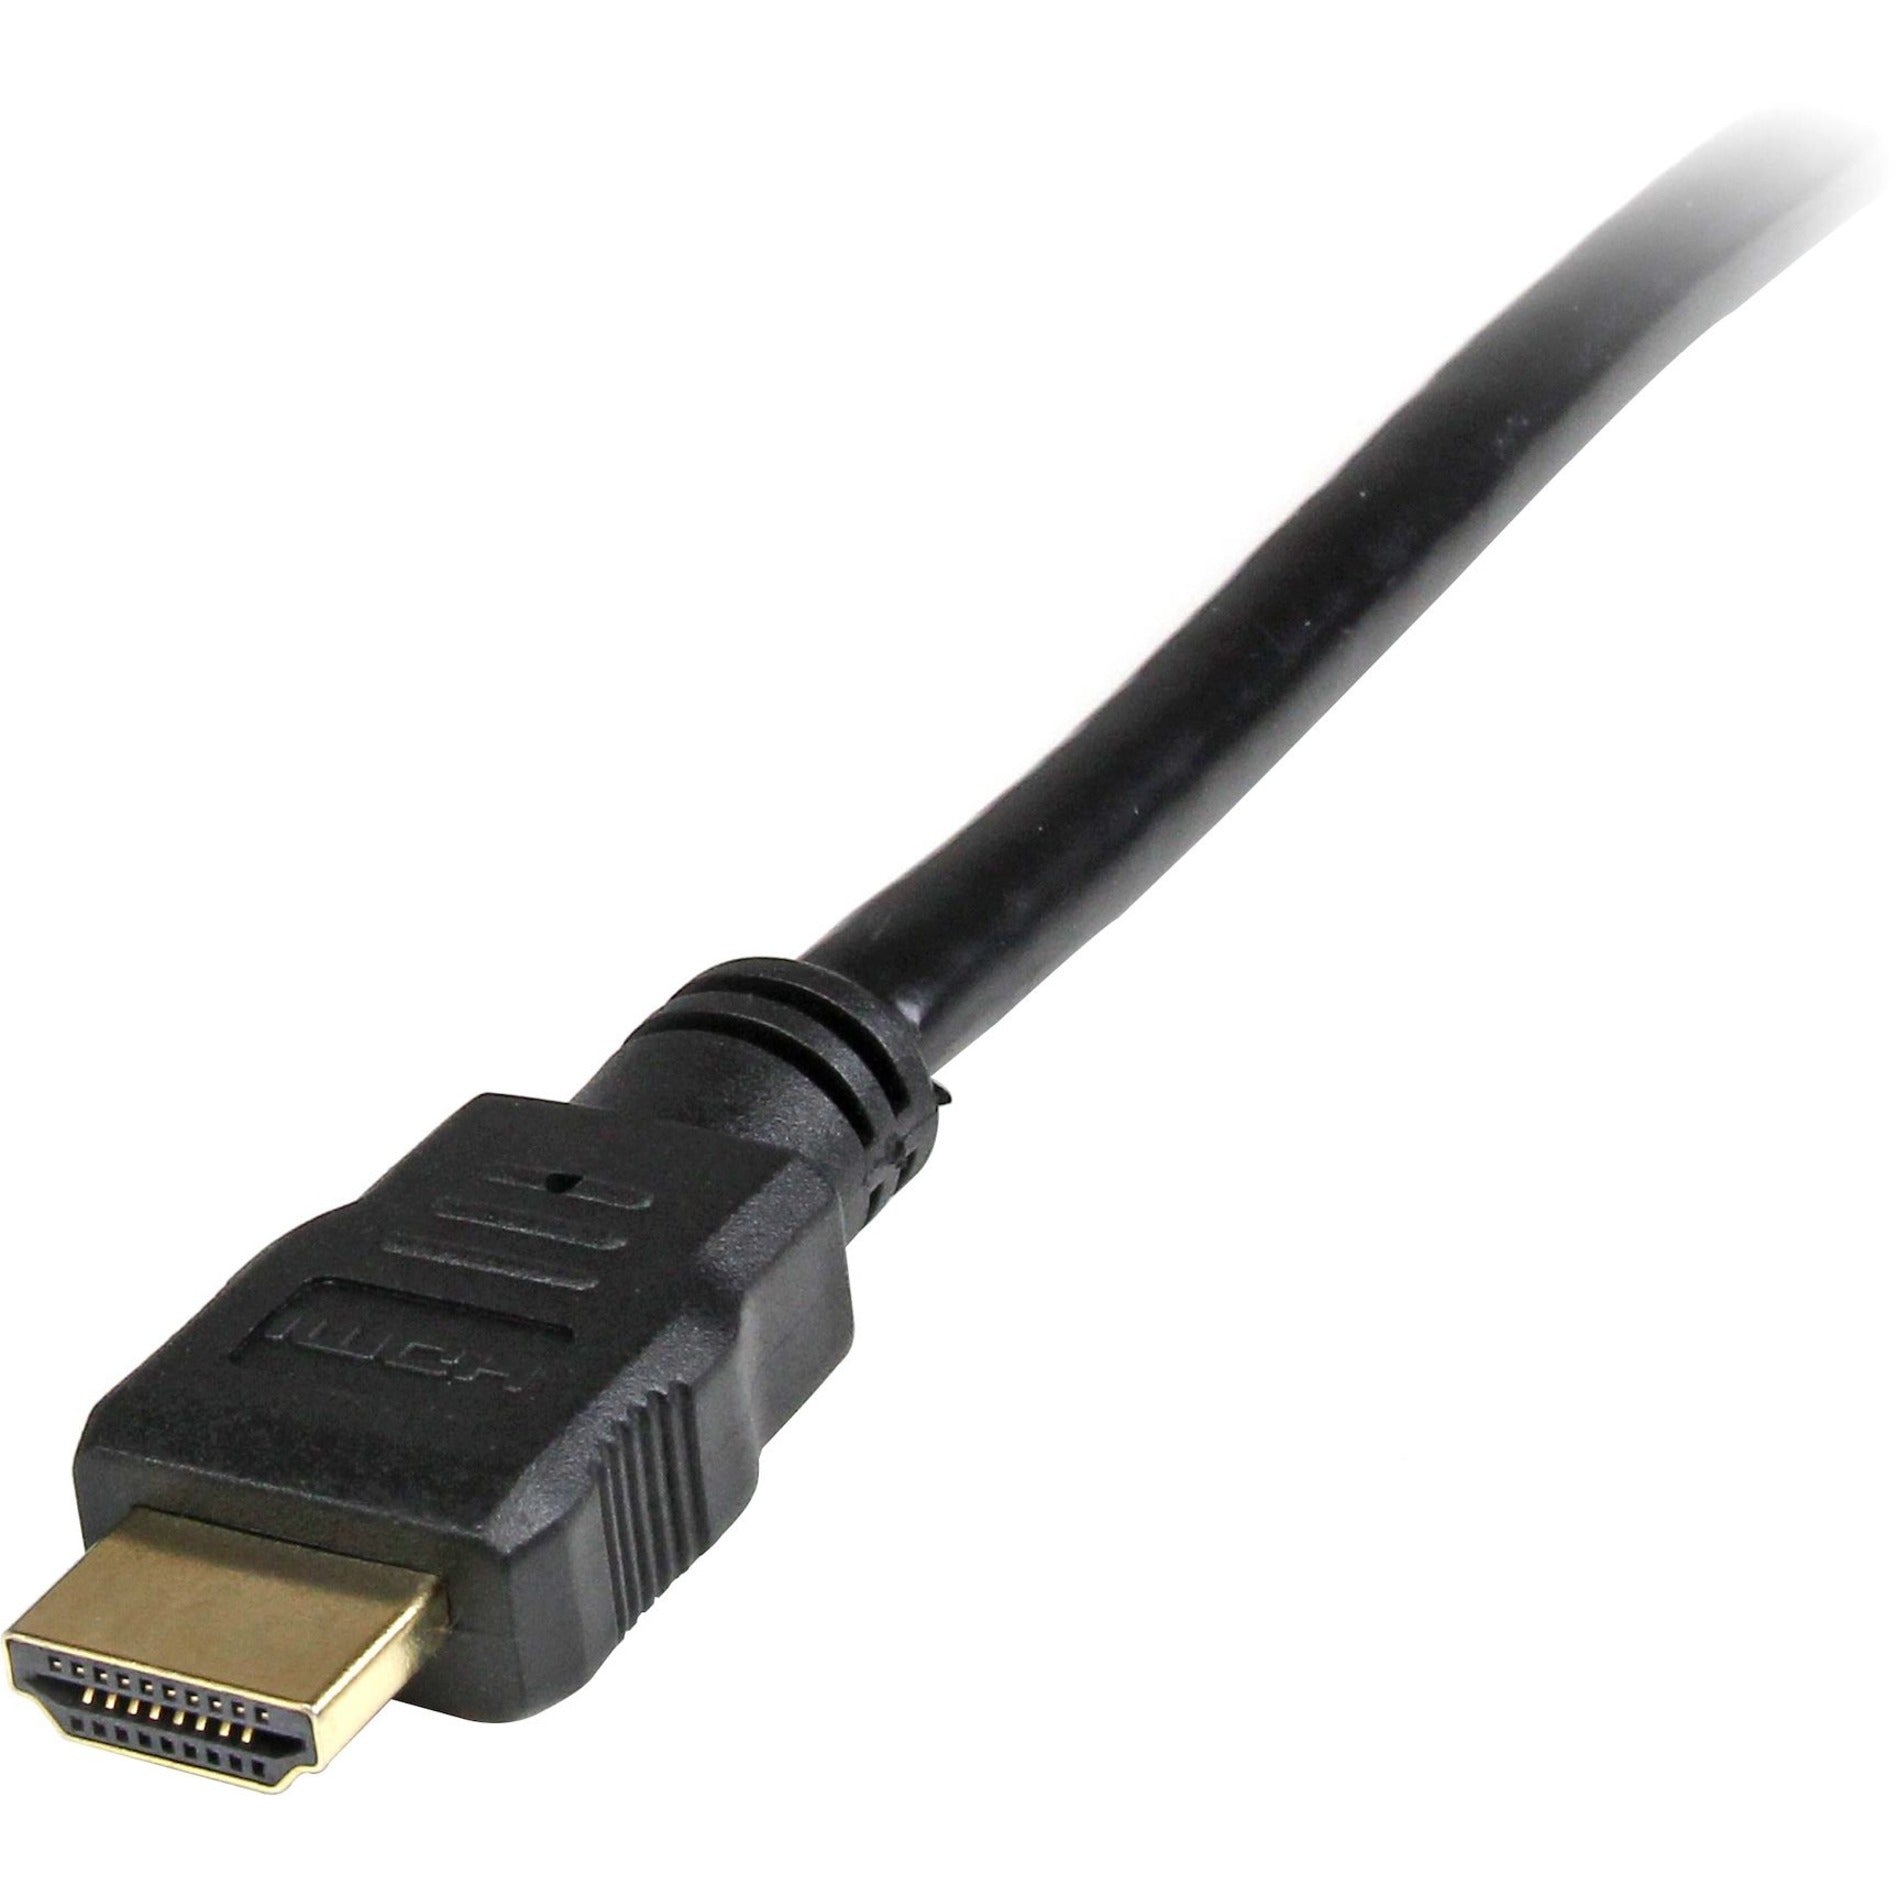 StarTech.com HDMIDVIMM15 15 ft HDMI to DVI-D Cable - M/M, Video Cable Adapter